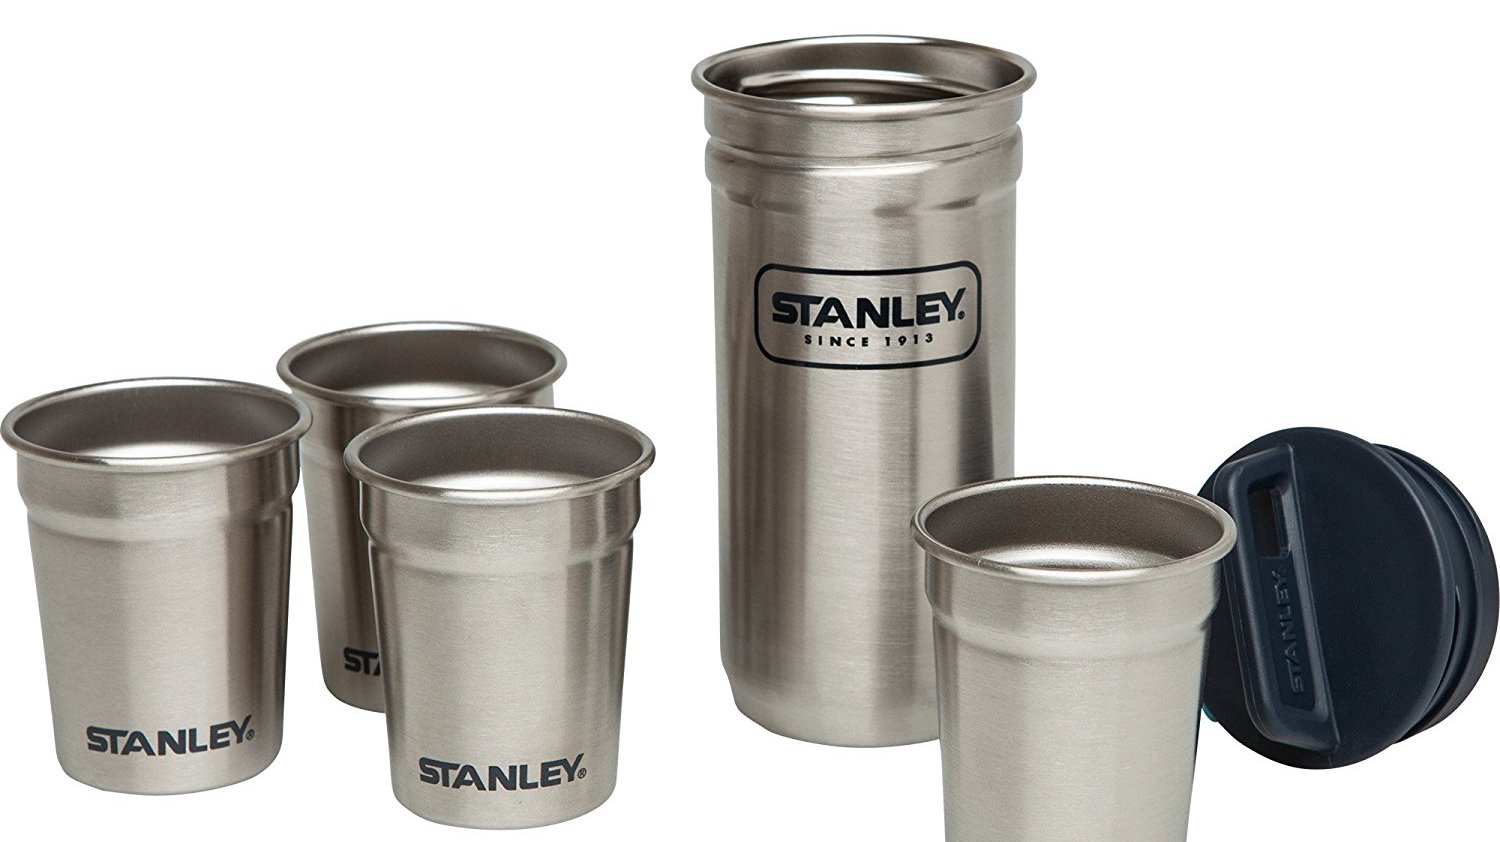 Stanley's Stainless Steel 2-Oz. Shot Glass Set is yours for just over $10  Prime shipped